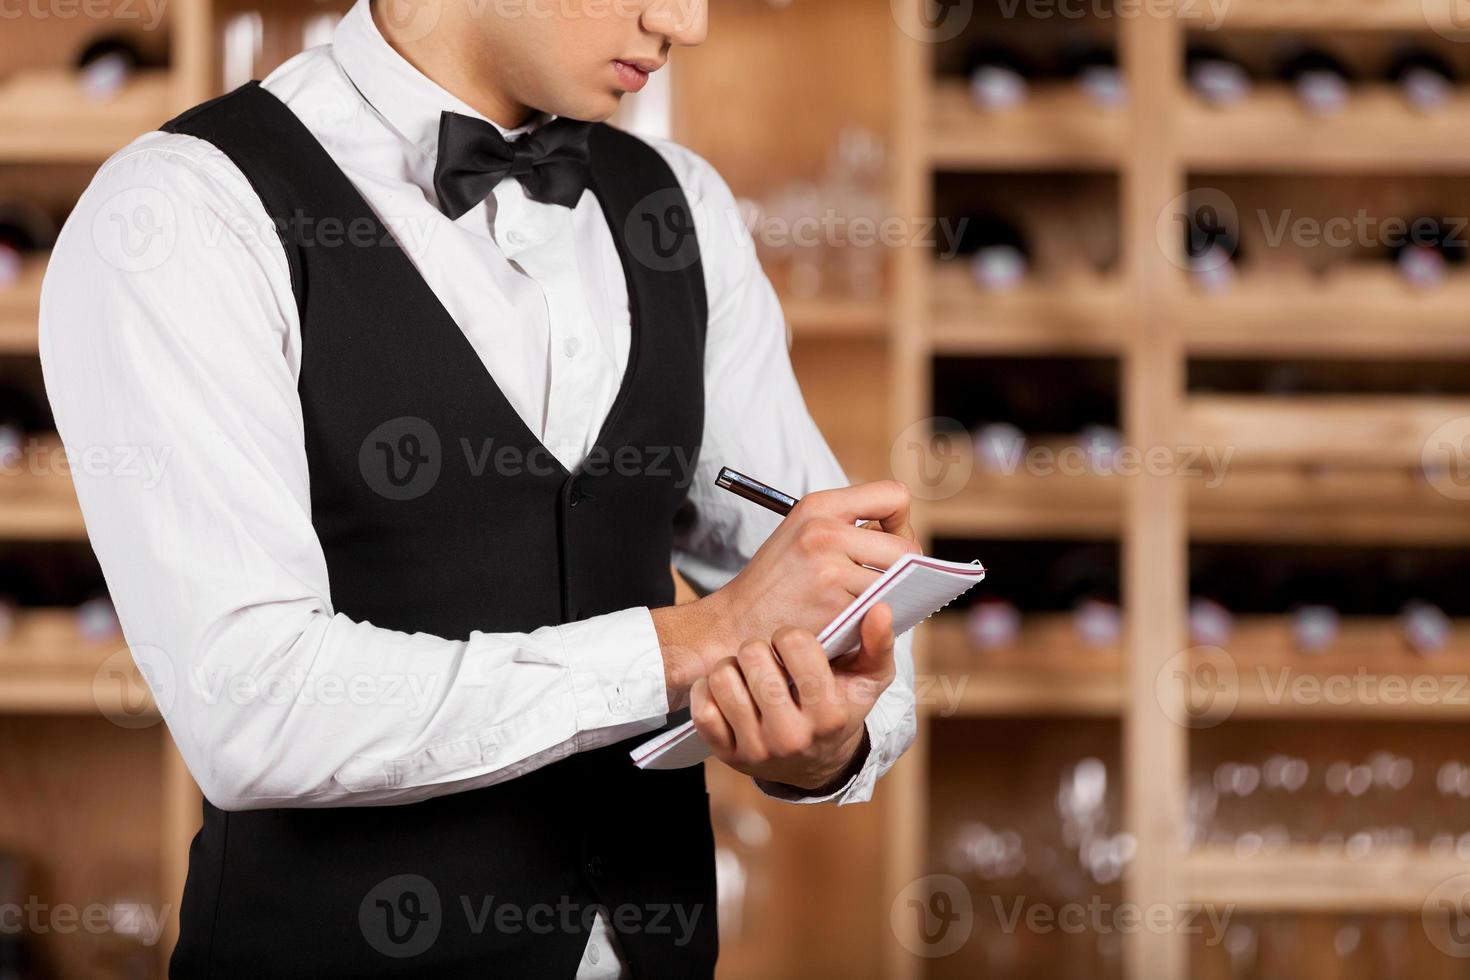 Checking wine list. Cropped image of young sommelier writing something at his note pad while standing in front of shelf with wine bottles photo